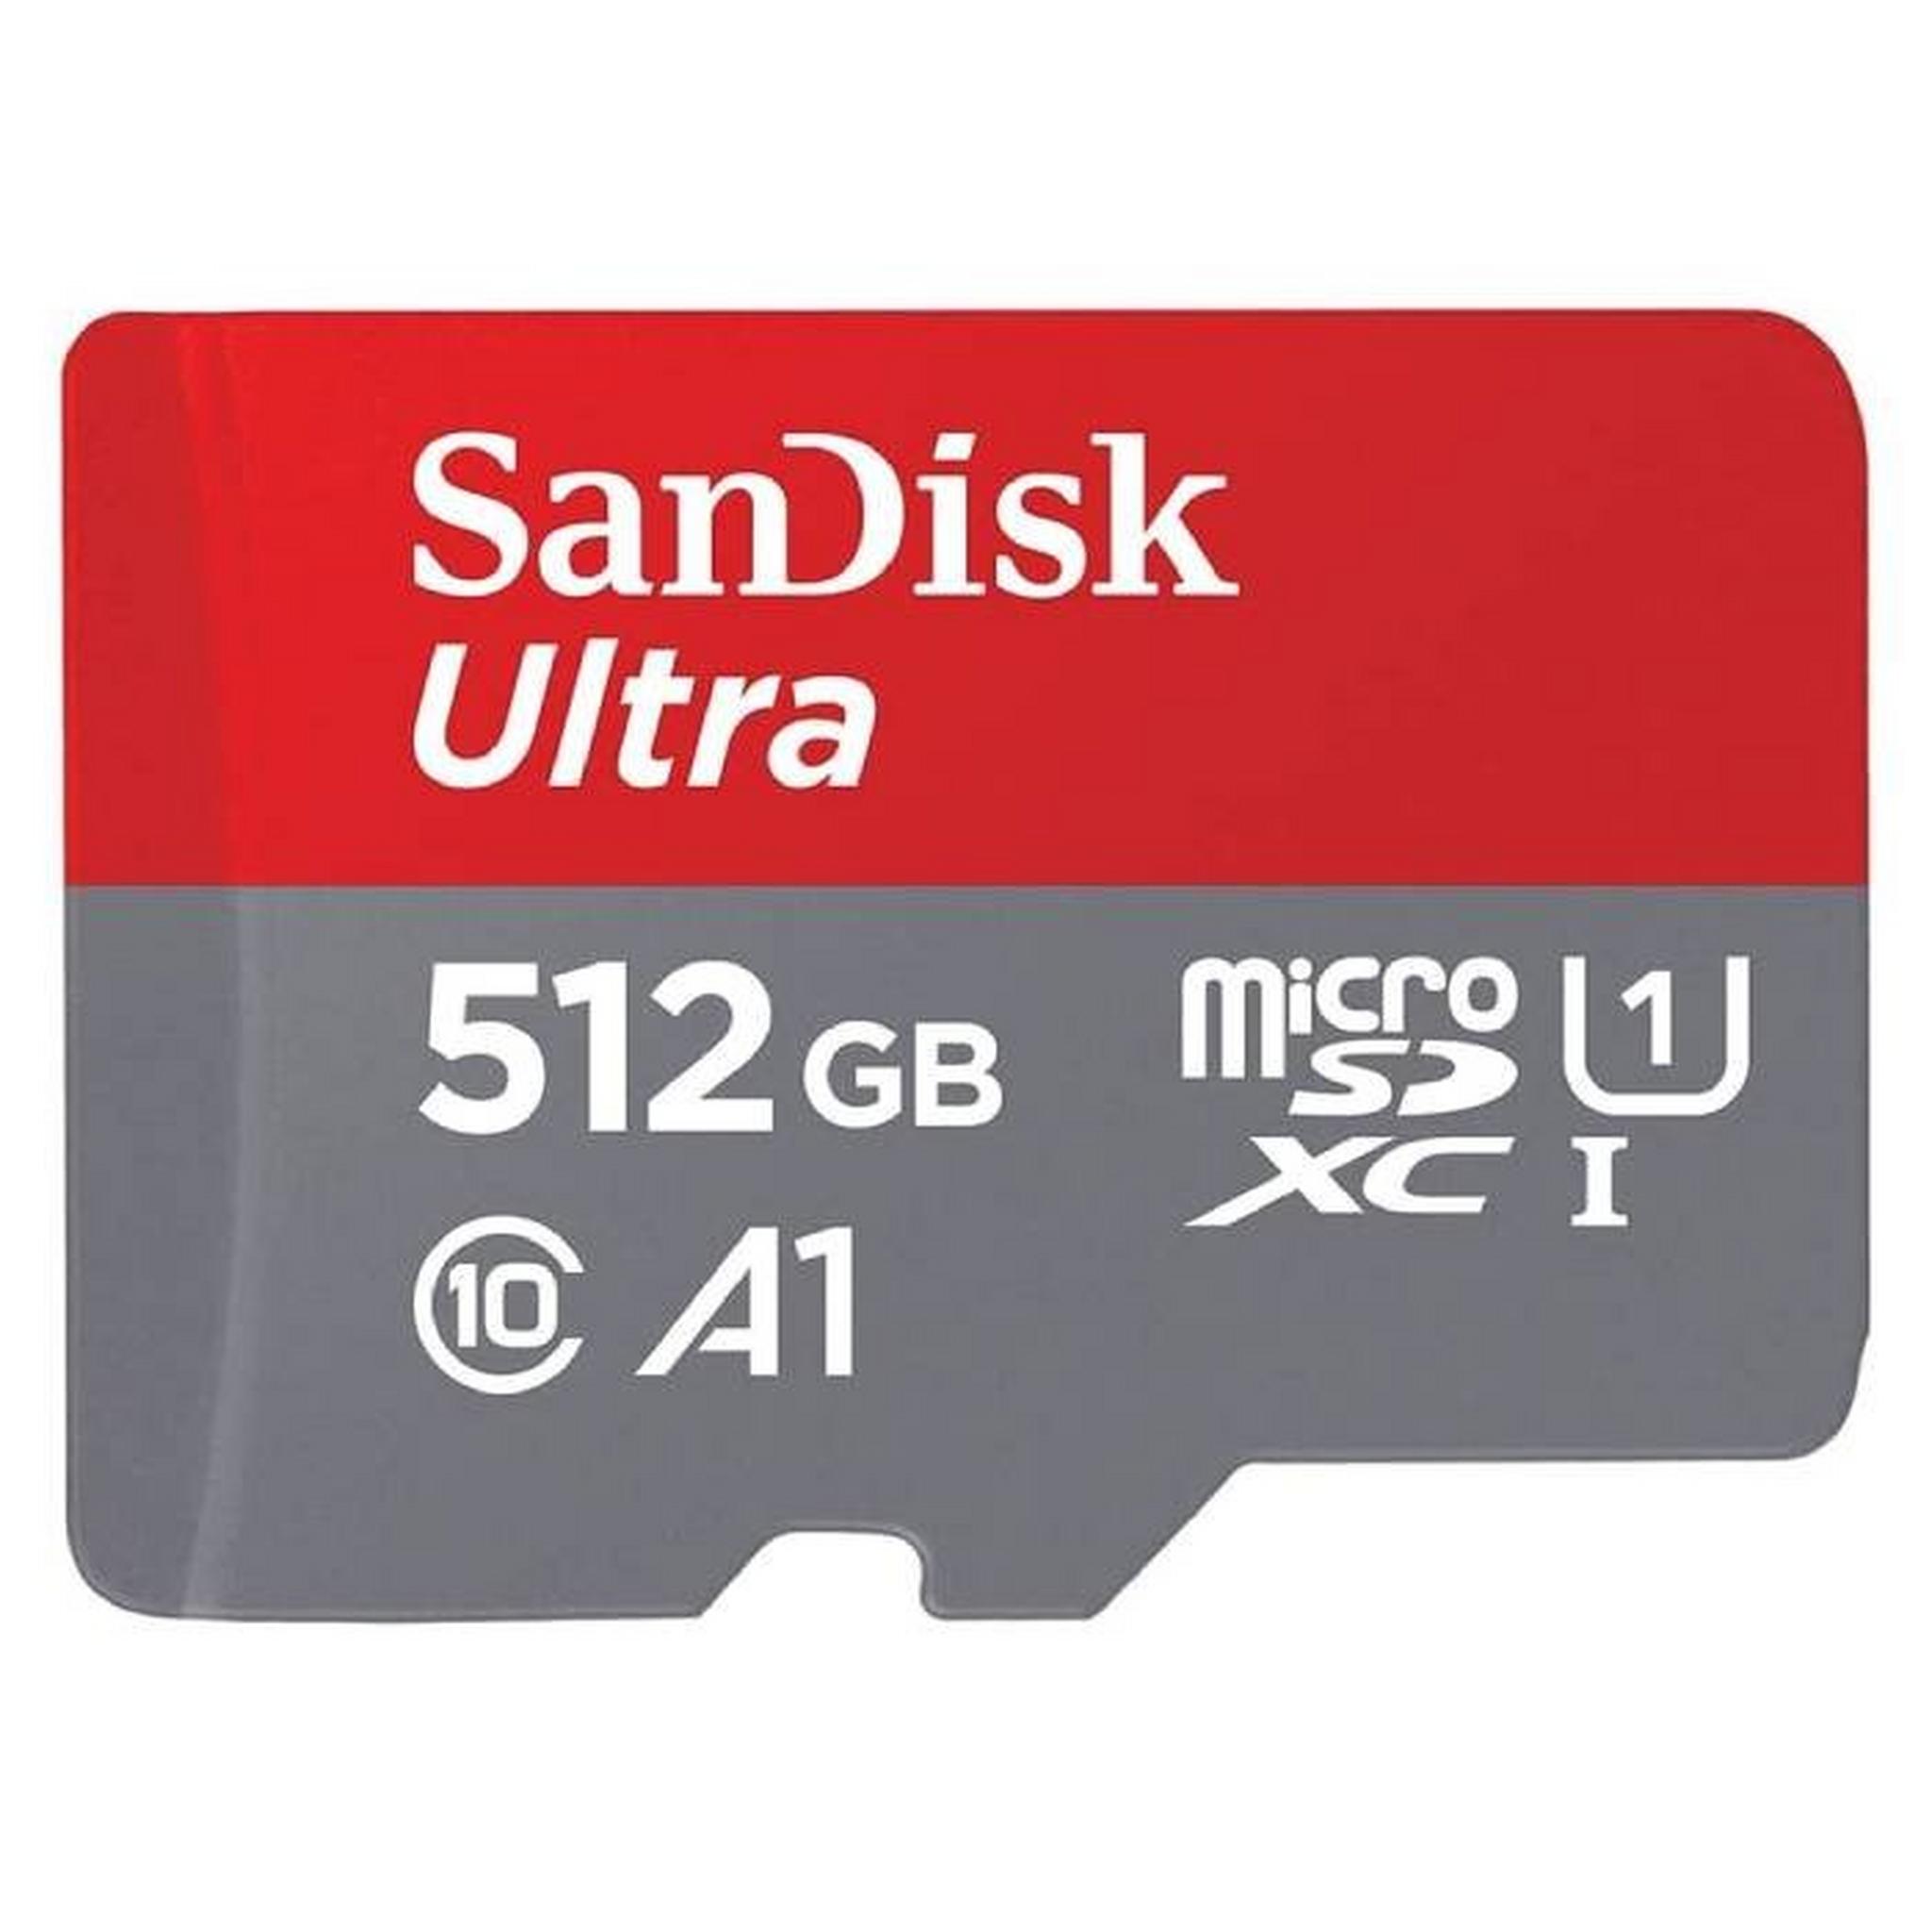 SanDisk Ultra UHS MicroSD Card for Action Cameras and Smartphones, 512GB, SDSQUAC-512G-GN6MN